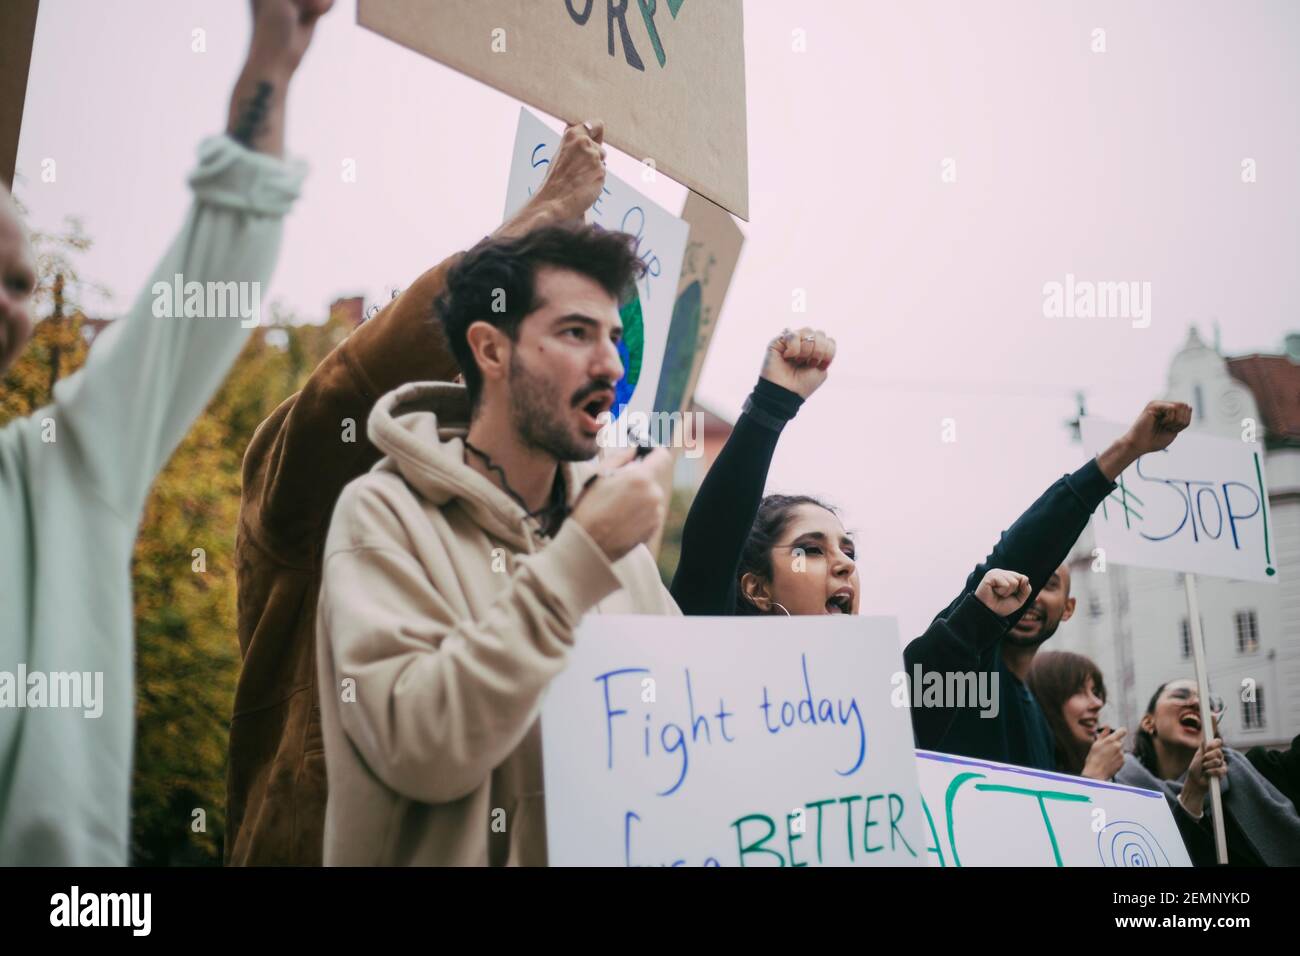 Male and female activist screaming in social movement Stock Photo